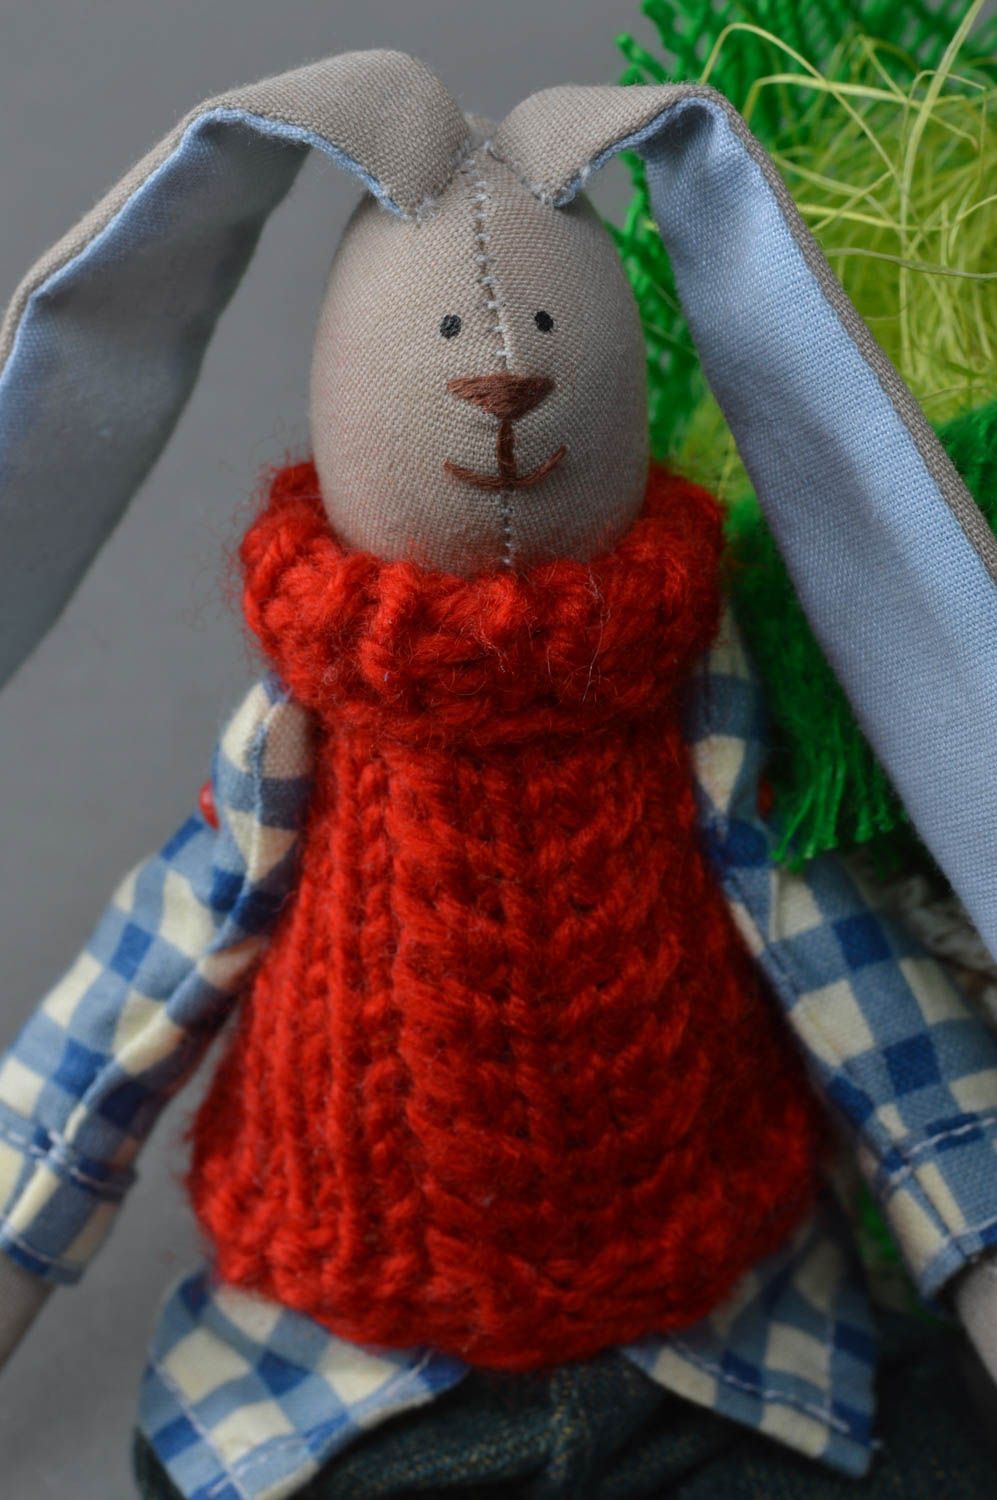 Handmade small fabric soft toy rabbit in red knit vest and checkered shirt photo 3